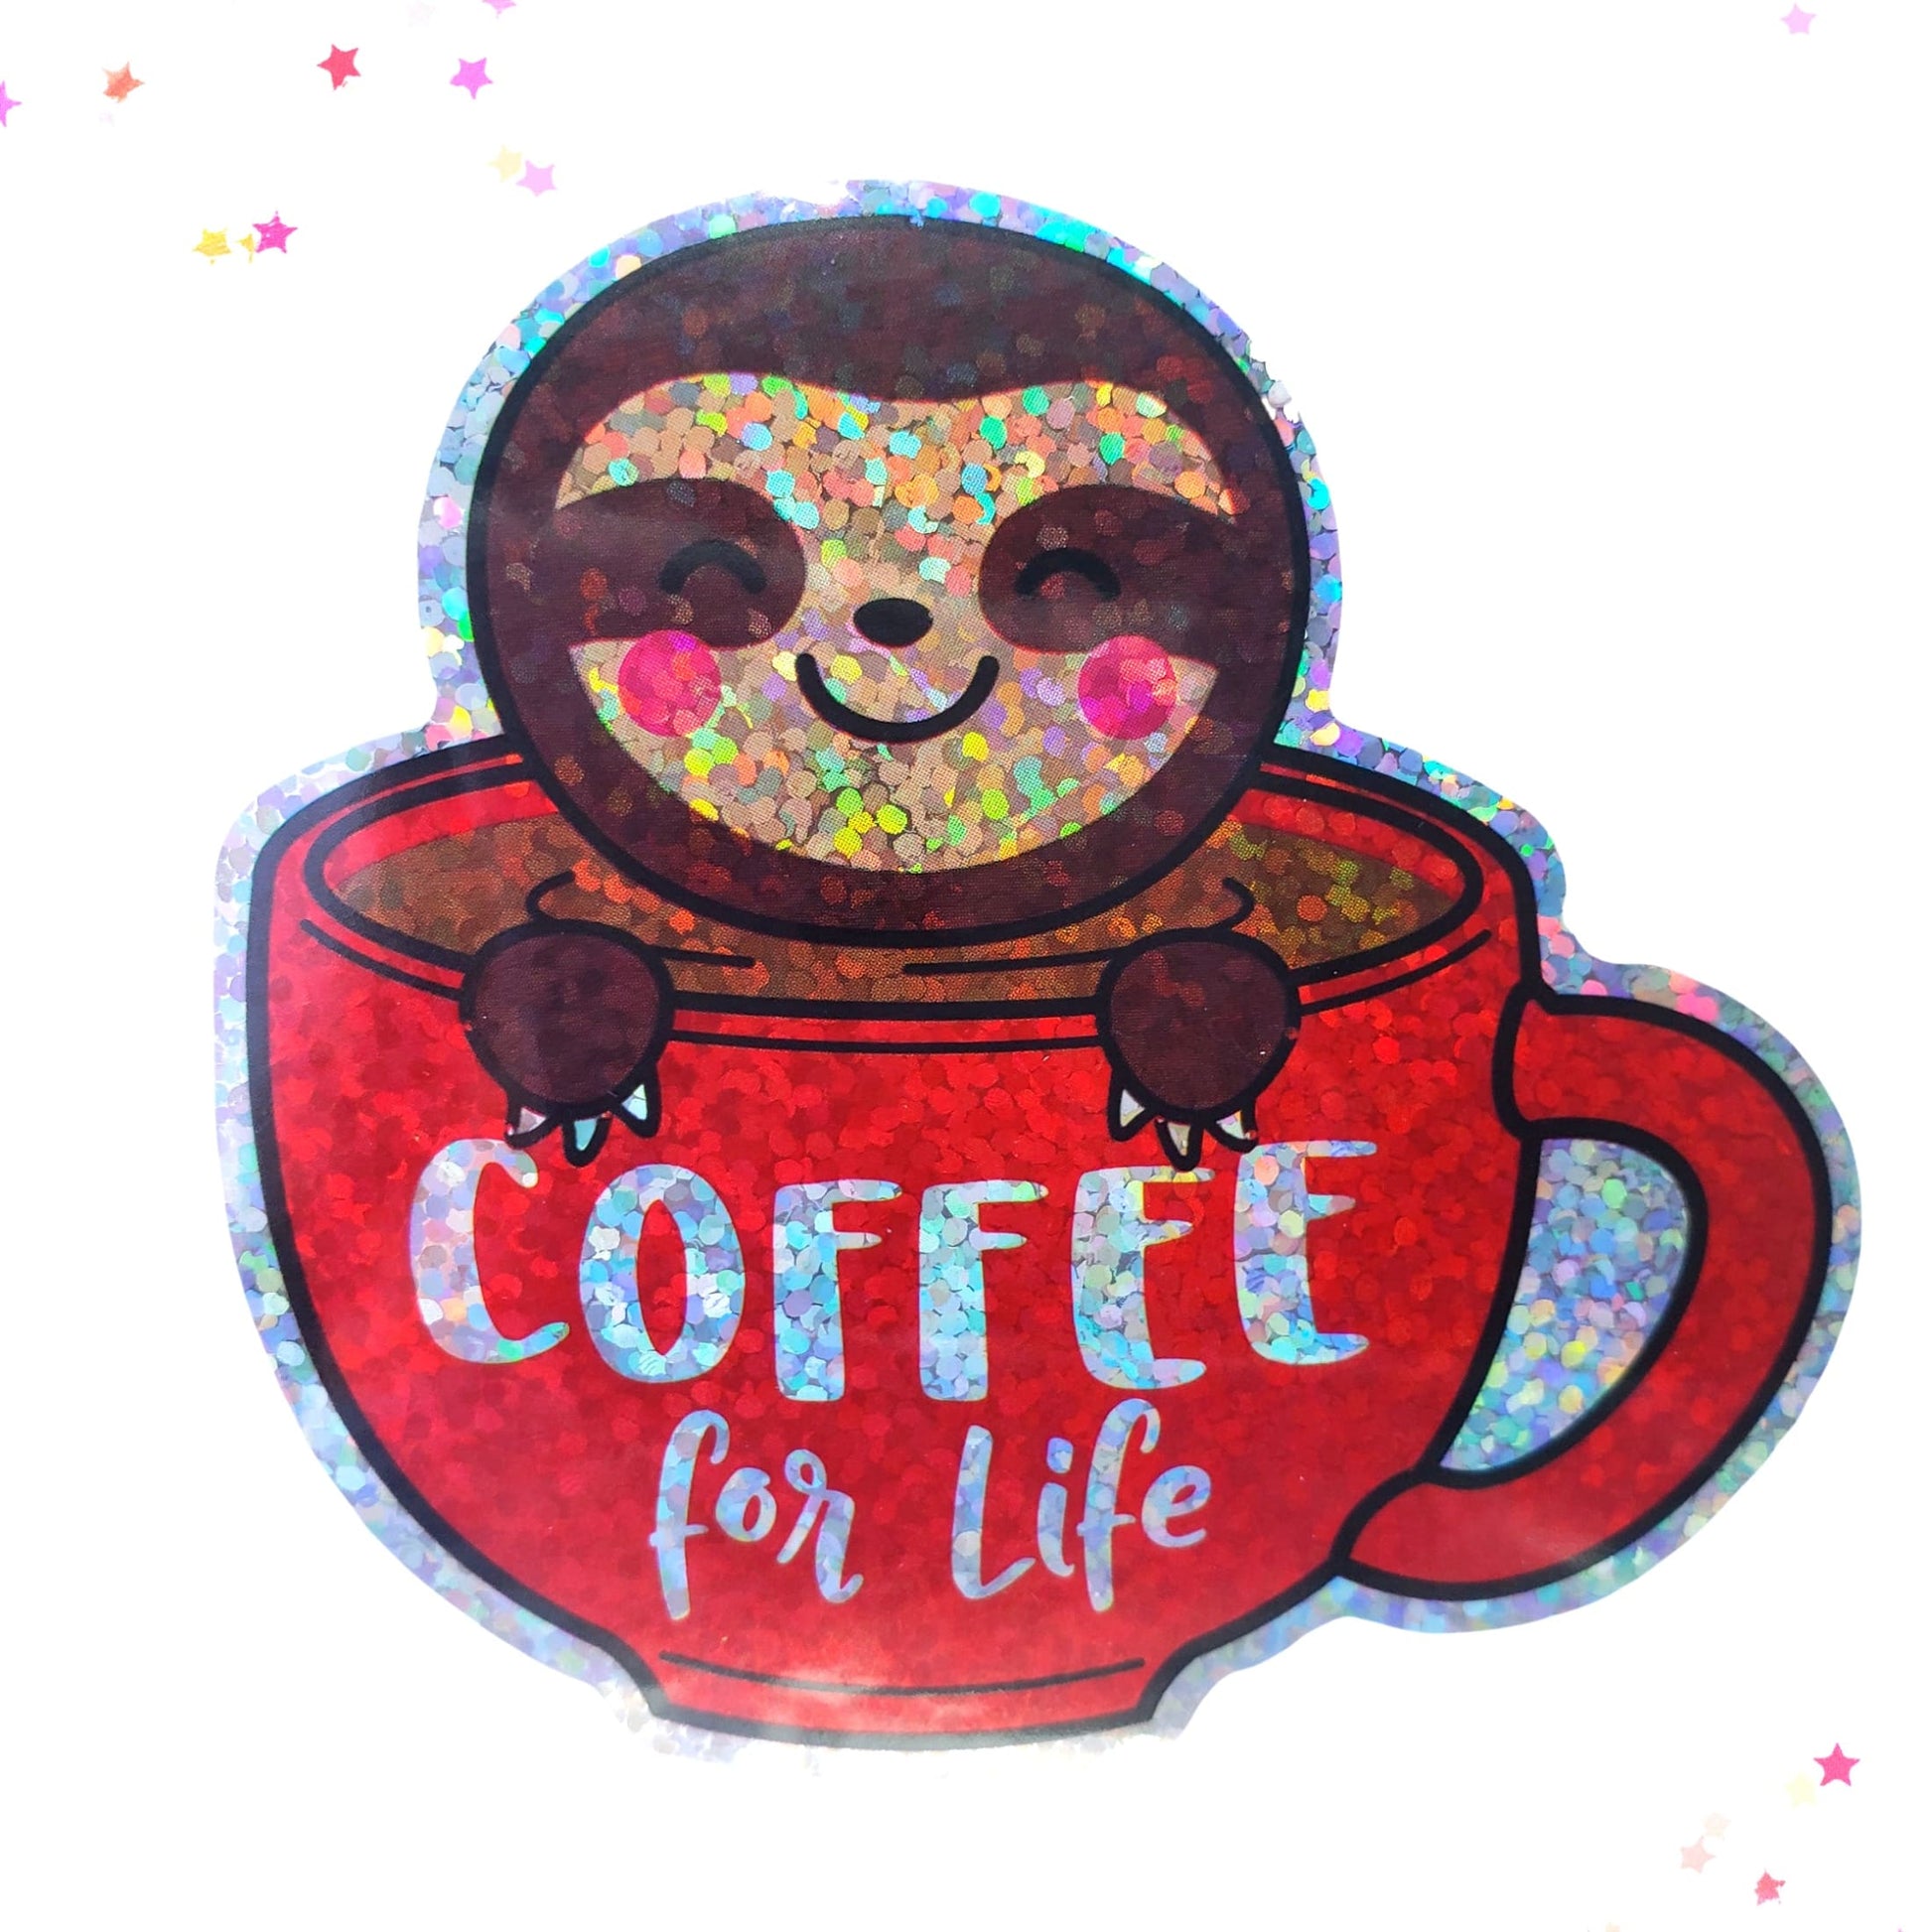 Premium Sticker - Sparkly Holographic Glitter Coffee for Life Sloth from Confetti Kitty, Only 2.00